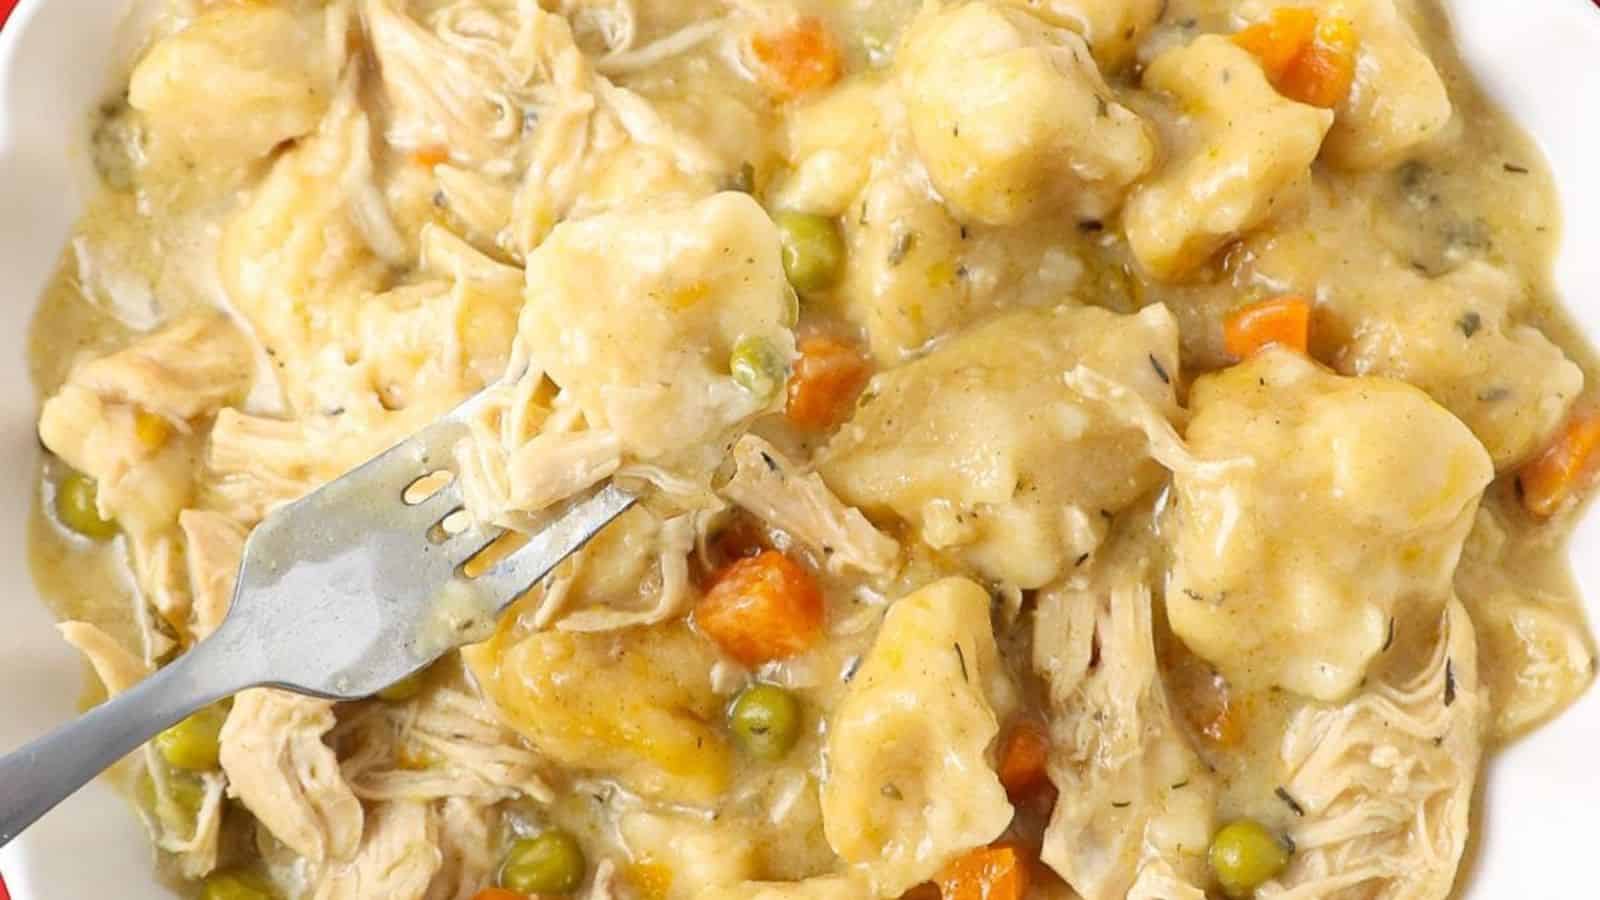 Creamy chicken and dumplings in a slow cooker.